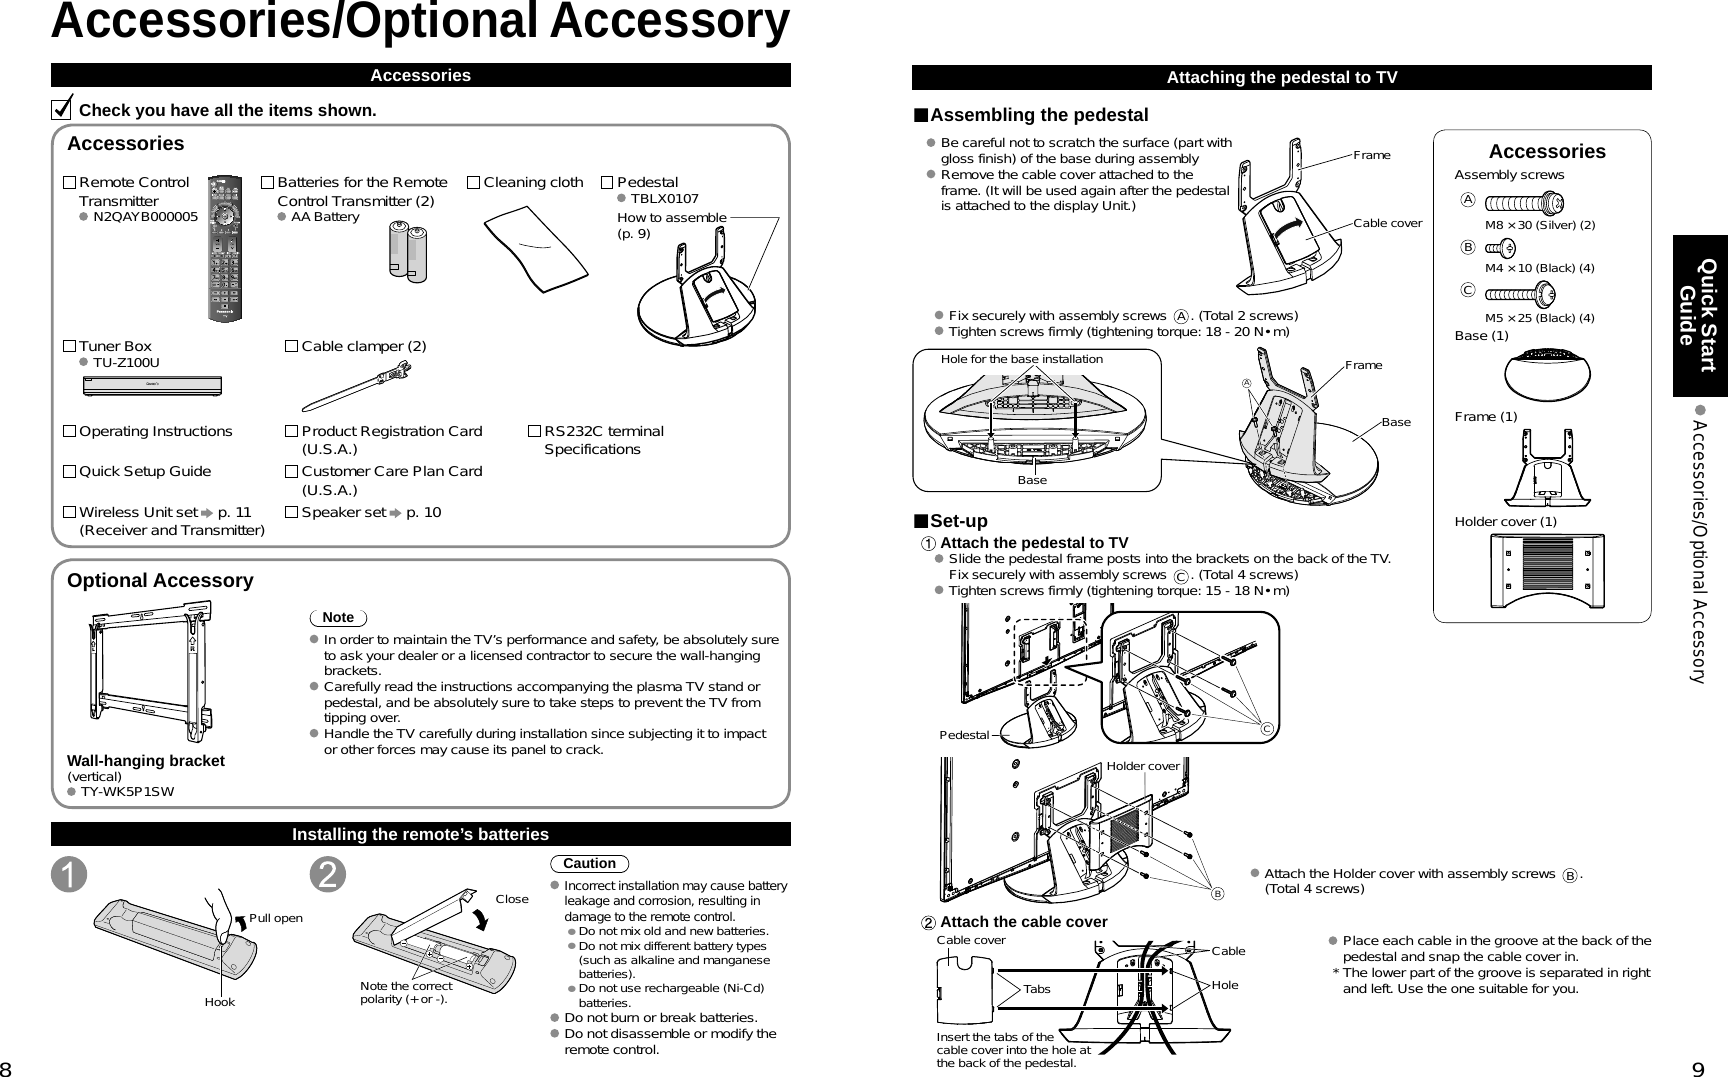 8 9Quick Start Guide  Accessories/Optional AccessoryAccessoriesAssembly screws AM8 × 30 (Silver) (2)BM4 × 10 (Black) (4)CM5 × 25 (Black) (4) Base (1) Frame (1) Holder cover (1)VIERACASTVIERATOOLSVIERALinkAccessories/Optional AccessoryAccessoriesCheck you have all the items shown.Remote Control Transmitter N2QAYB000005Batteries for the Remote Control Transmitter (2) AA BatteryPedestal TBLX0107Product Registration Card (U.S.A.)Customer Care Plan Card (U.S.A.)Operating InstructionsQuick Setup Guide Installing the remote’s batteriesPull openHook Note the correct polarity (+ or -).CloseCautionIncorrect installation may cause battery leakage and corrosion, resulting in damage to the remote control. •  Do not mix old and new batteries. •  Do not mix different battery types (such as alkaline and manganese batteries). •  Do not use rechargeable (Ni-Cd) batteries. Do not burn or break batteries. Do not disassemble or modify the remote control.Optional AccessoryNote In order to maintain the TV’s performance and safety, be absolutely sure to ask your dealer or a licensed contractor to secure the wall-hanging brackets. Carefully read the instructions accompanying the plasma TV stand or pedestal, and be absolutely sure to take steps to prevent the TV from tipping over. Handle the TV carefully during installation since subjecting it to impact or other forces may cause its panel to crack.Wall-hanging bracket(vertical) TY-WK5P1SWAttaching the pedestal to TVAssembling the pedestalBe careful not to scratch the surface (part with gloss finish) of the base during assemblyRemove the cable cover attached to the frame. (It will be used again after the pedestal is attached to the display Unit.)FrameCable cover Fix securely with assembly screws A. (Total 2 screws) Tighten screws firmly (tightening torque: 18 - 20 N• m)AHole for the base installationBaseFrameBaseSet-up Attach the pedestal to TVSlide the pedestal frame posts into the brackets on the back of the TV. Fix securely with assembly screws C. (Total 4 screws) Tighten screws firmly (tightening torque: 15 - 18 N• m)CPedestalBHolder cover Attach the Holder cover with assembly screws B.(Total 4 screws) Attach the cable coverCable cover CableHoleTabsInsert the tabs of the cable cover into the hole at the back of the pedestal. Place each cable in the groove at the back of the pedestal and snap the cable cover in.  * The lower part of the groove is separated in right and left. Use the one suitable for you.AccessoriesHow to assemble (p. 9)Cleaning clothRS232C terminal SpecificationsWireless Unit set   p. 11(Receiver and Transmitter)Tuner Box TU-Z100U Cable clamper (2)Speaker set   p. 10